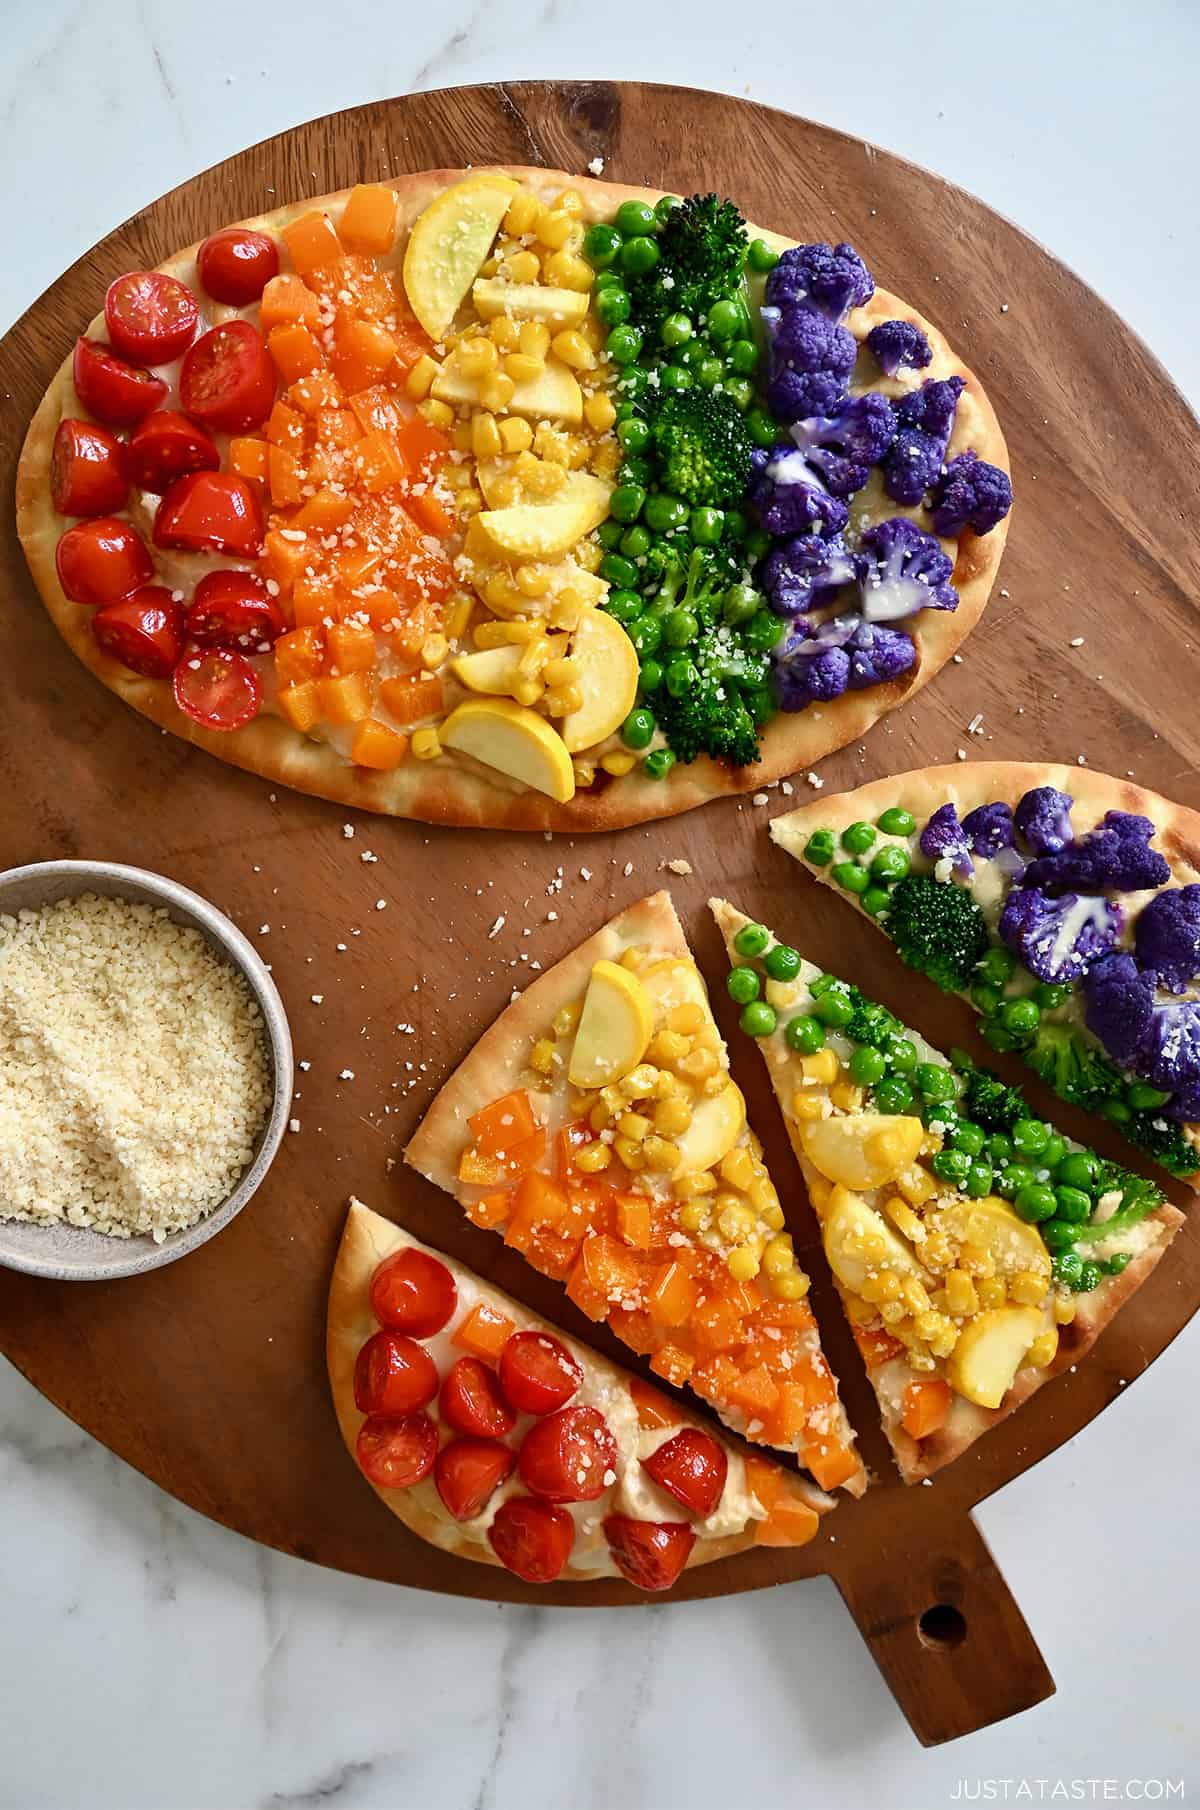 Two flatbread pizzas topped with a rainbow of veggies, including halved cherry tomatoes, diced orange bell pepper, fresh corn kernels, sliced summer squash, peas, broccoli florets, and purple cauliflower florets.